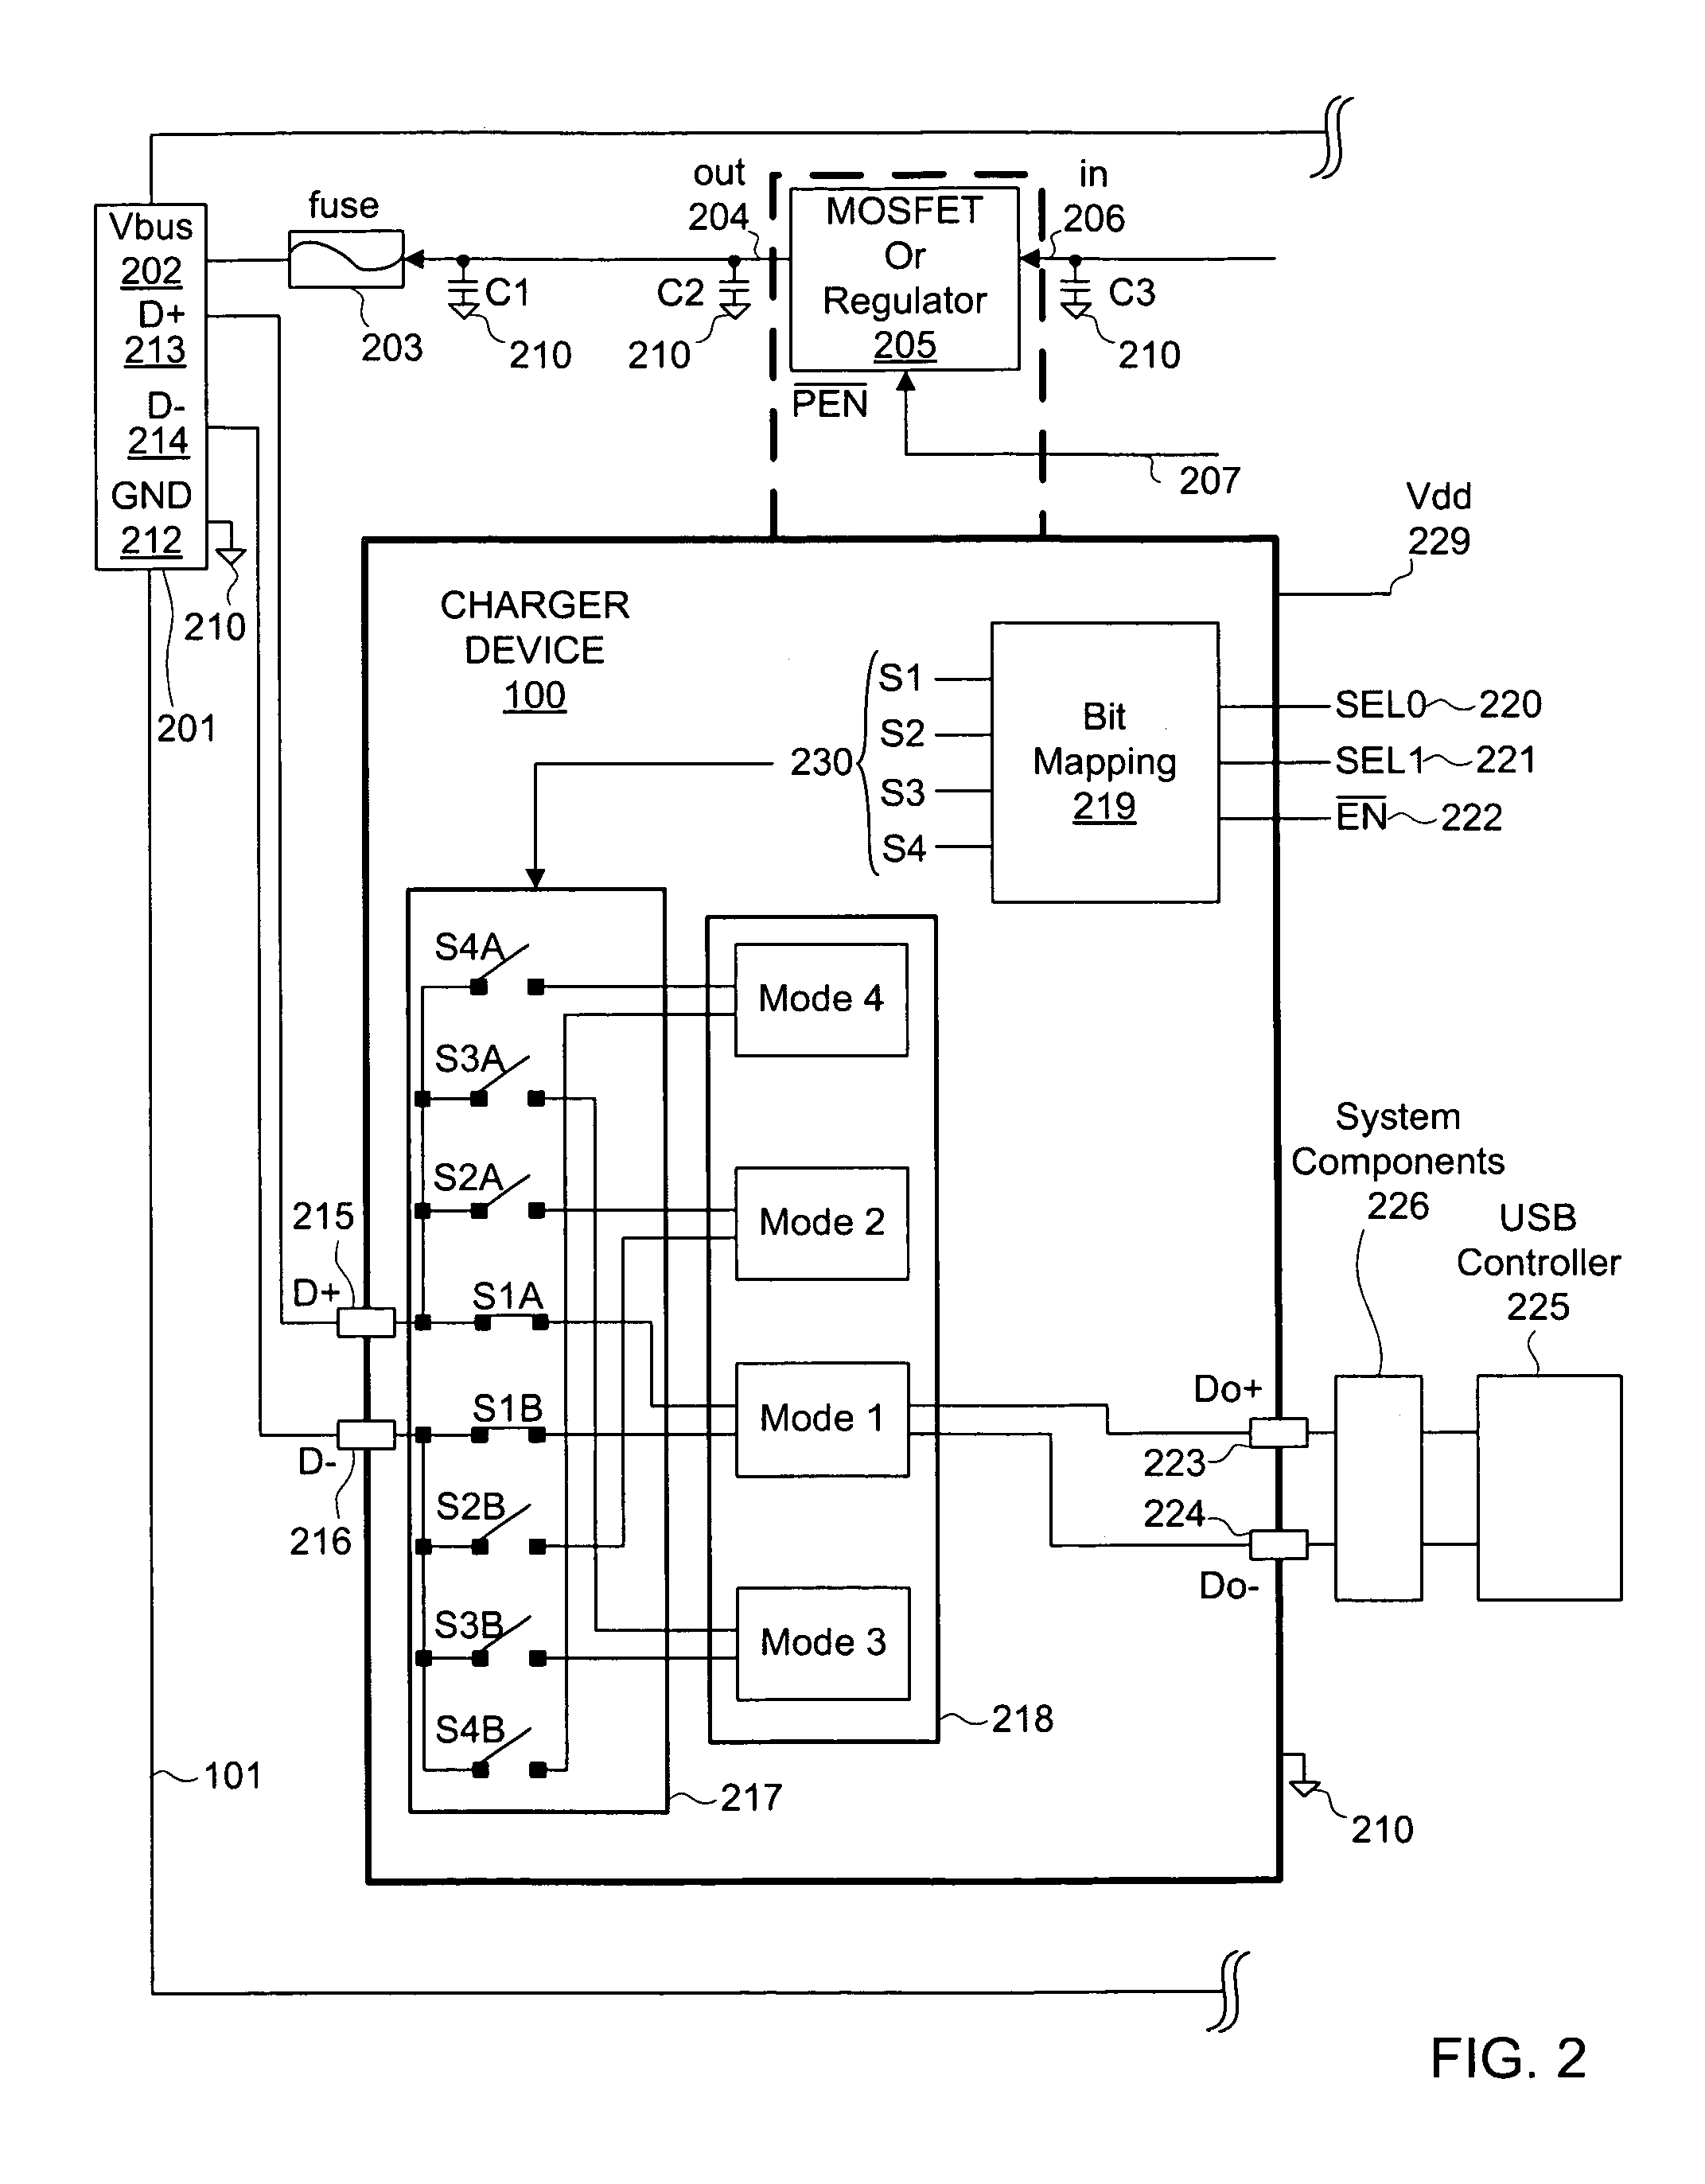 Multi-mode charger device